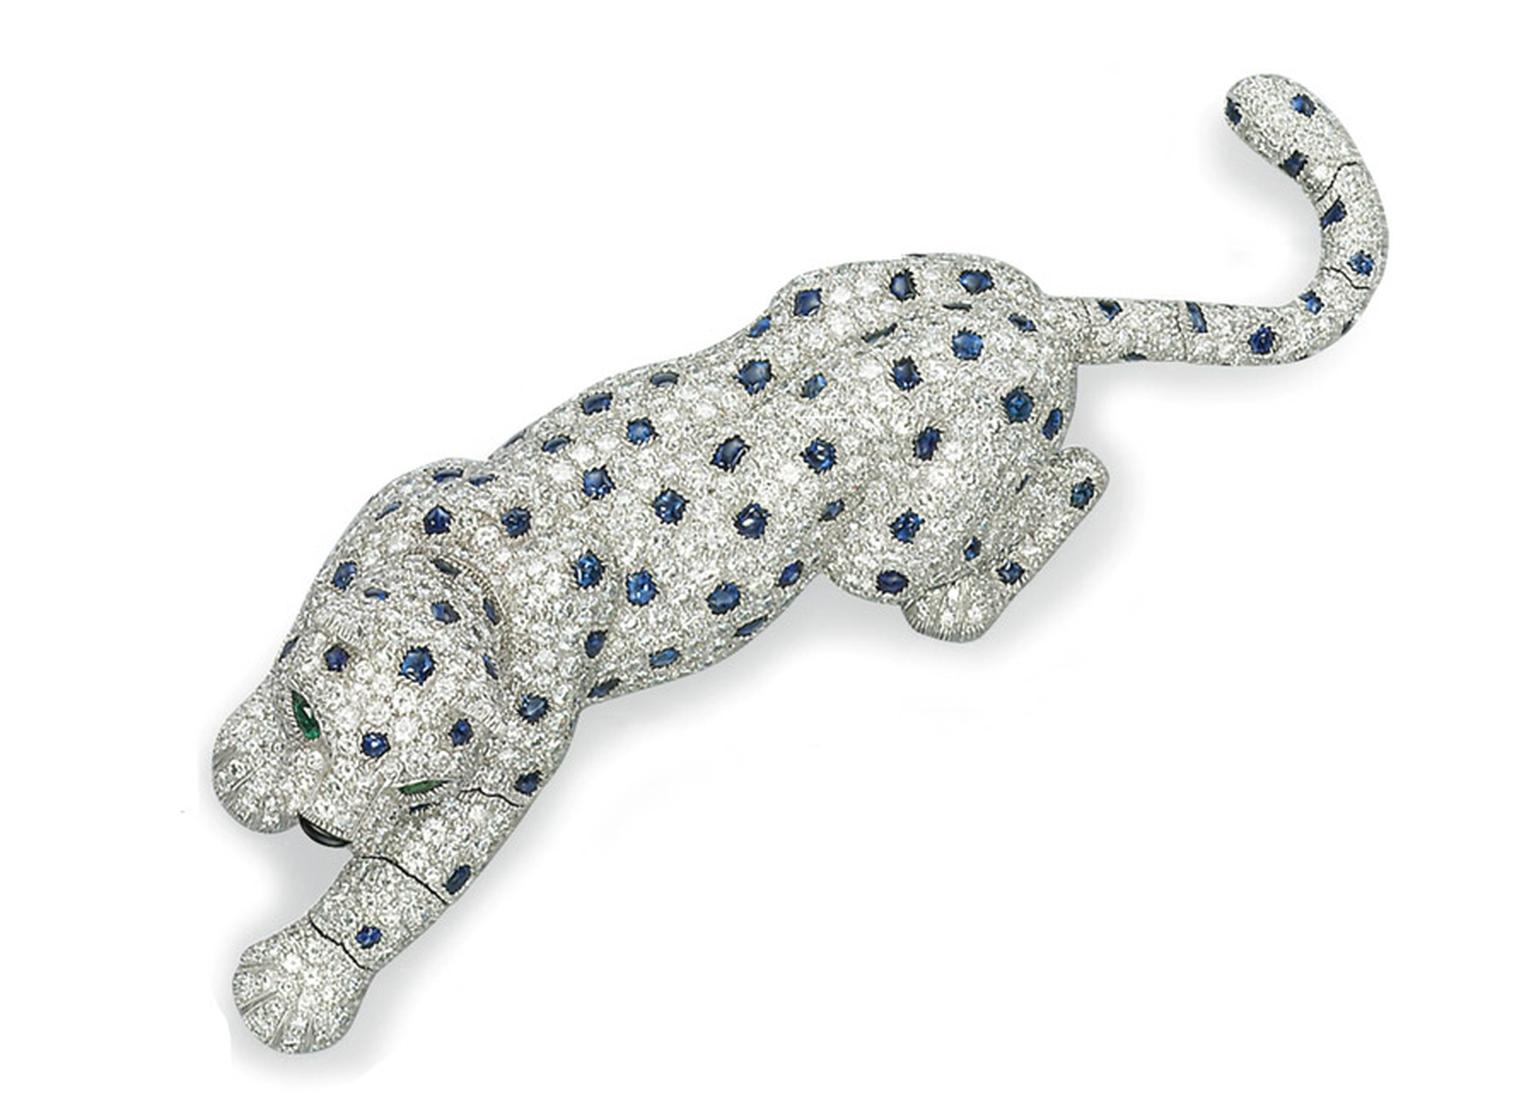 Christies-Lot-361-SAPPHIRE-DIAMOND-EMERALD-AND-ENAMEL-PANTHER-BROOCH-BY-CARTIER.jpg